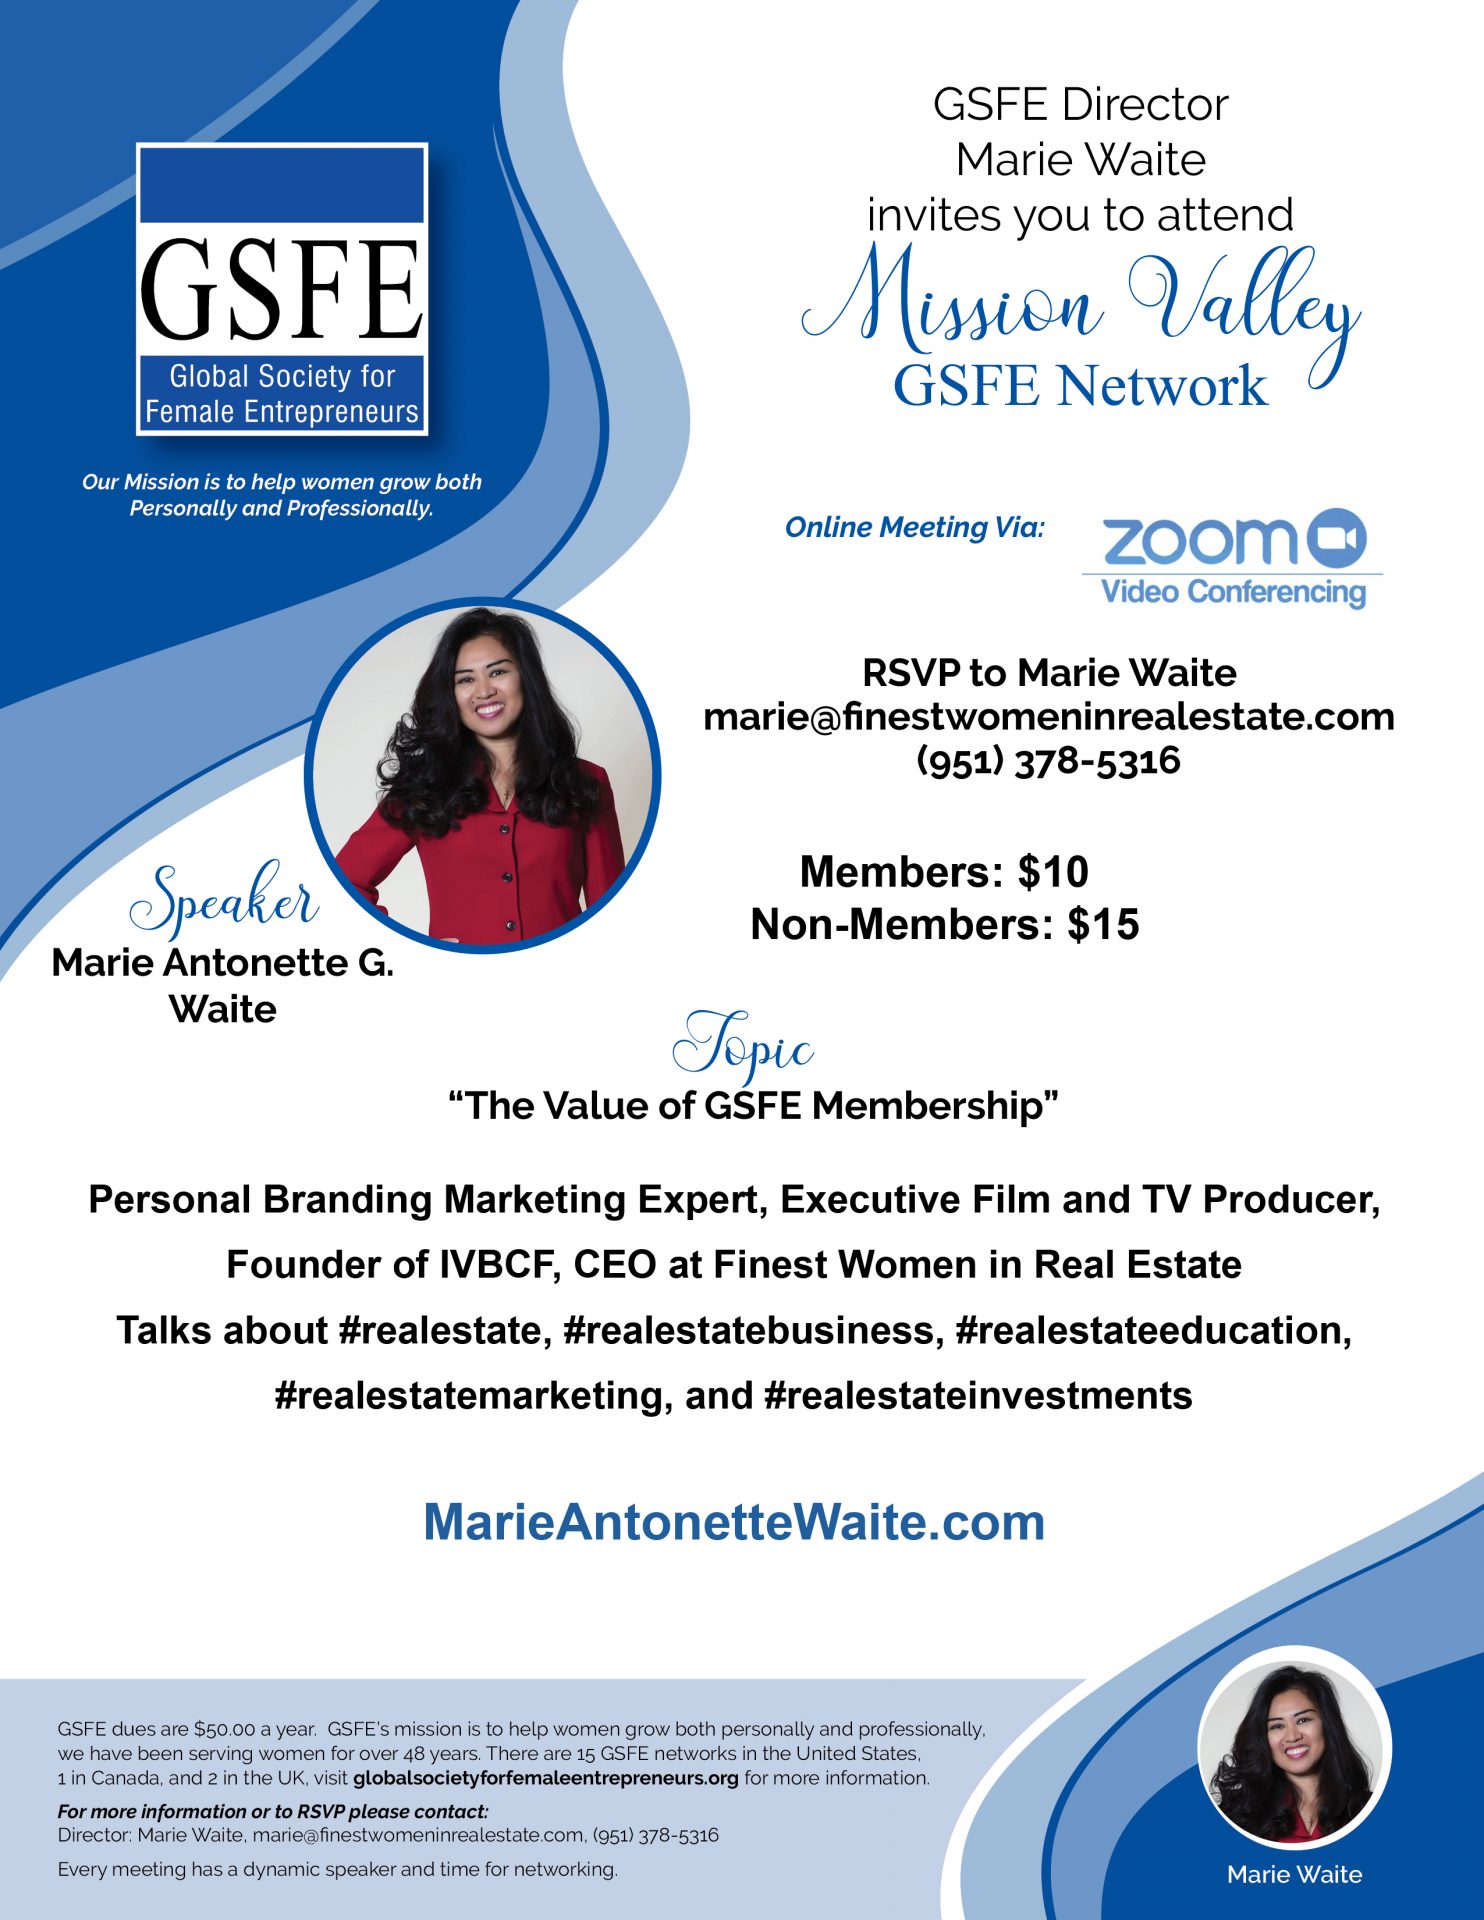 GSFE Meetings -October 2022-MISSION VALLEY